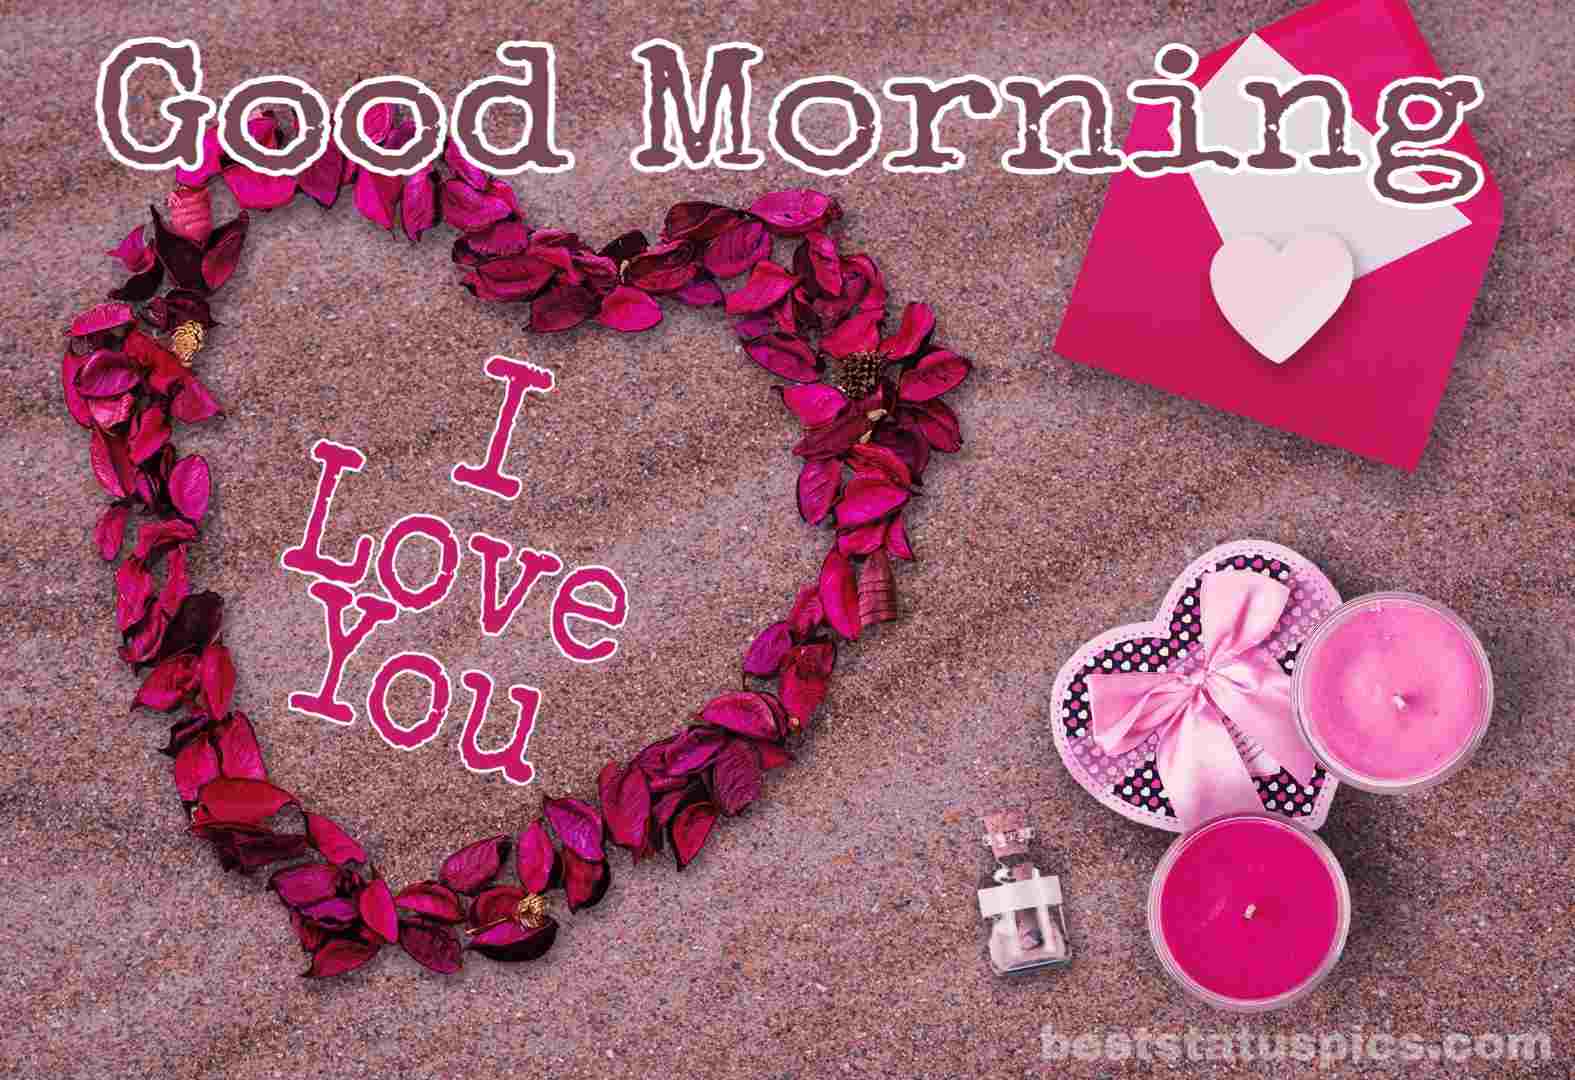 Good Morning I Love You Hd Images For Whatsapp Dp 2020 Best Status Pics